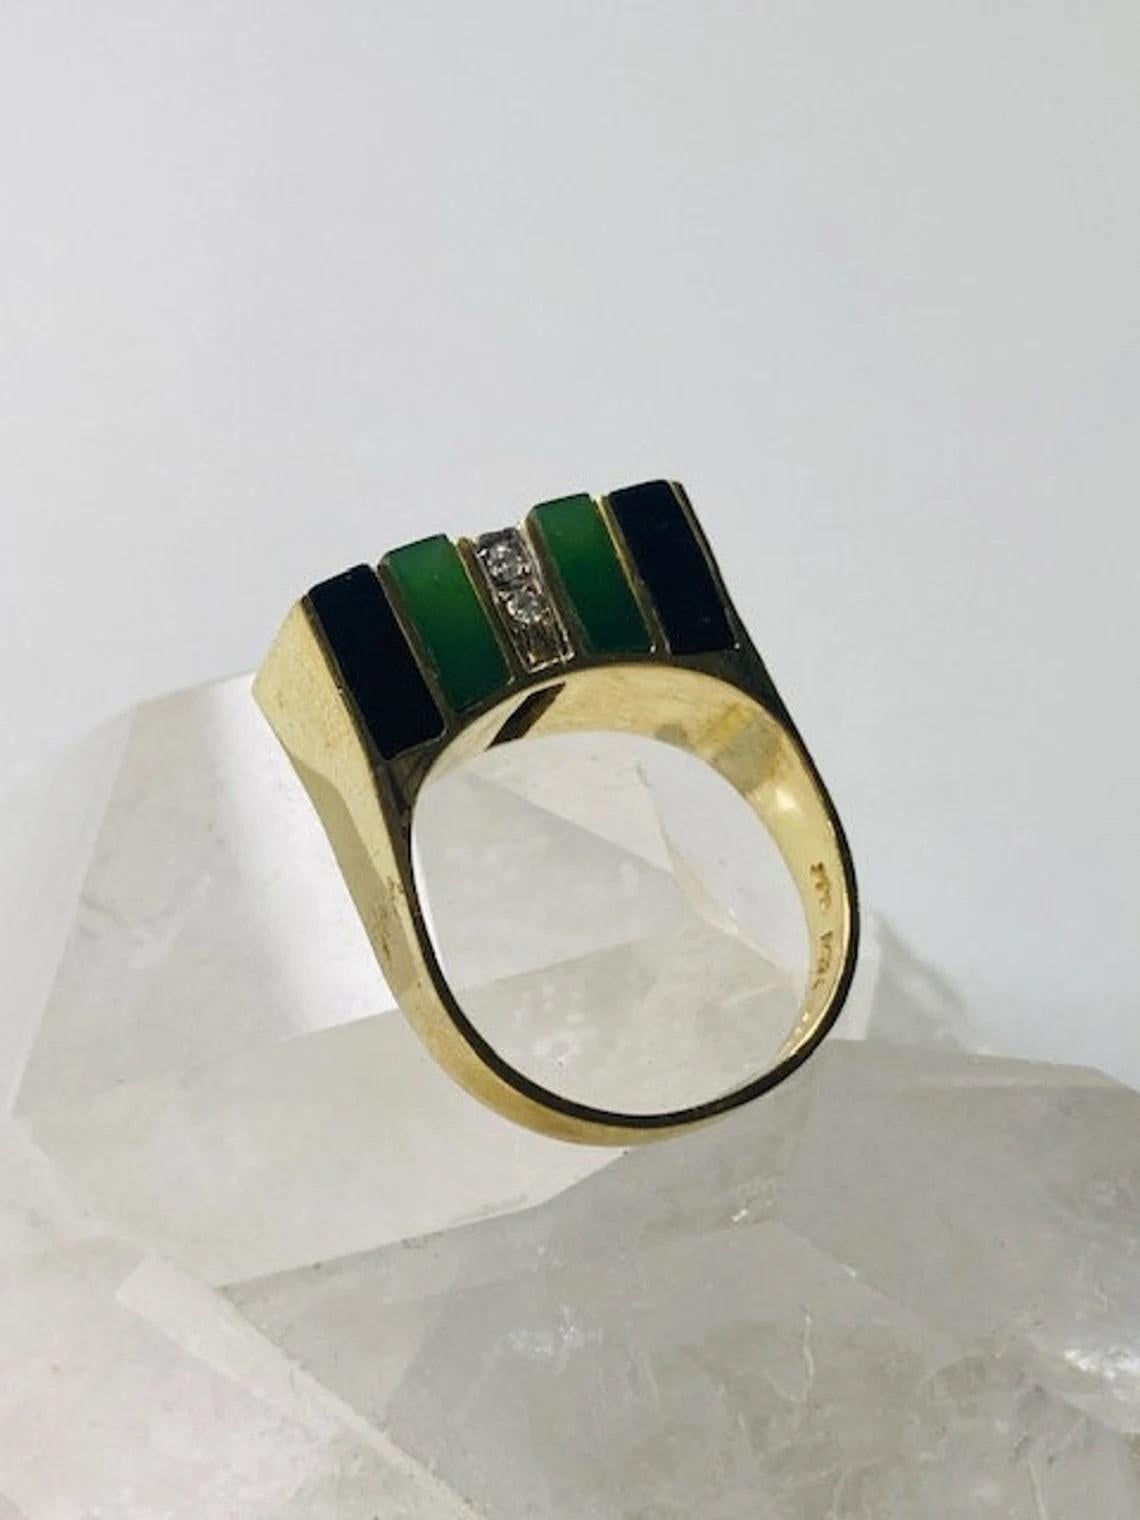 Vintage 14k Gold Malachite and Onyx Striped Ring with Diamonds, One-of-a-kind In Good Condition For Sale In London, GB